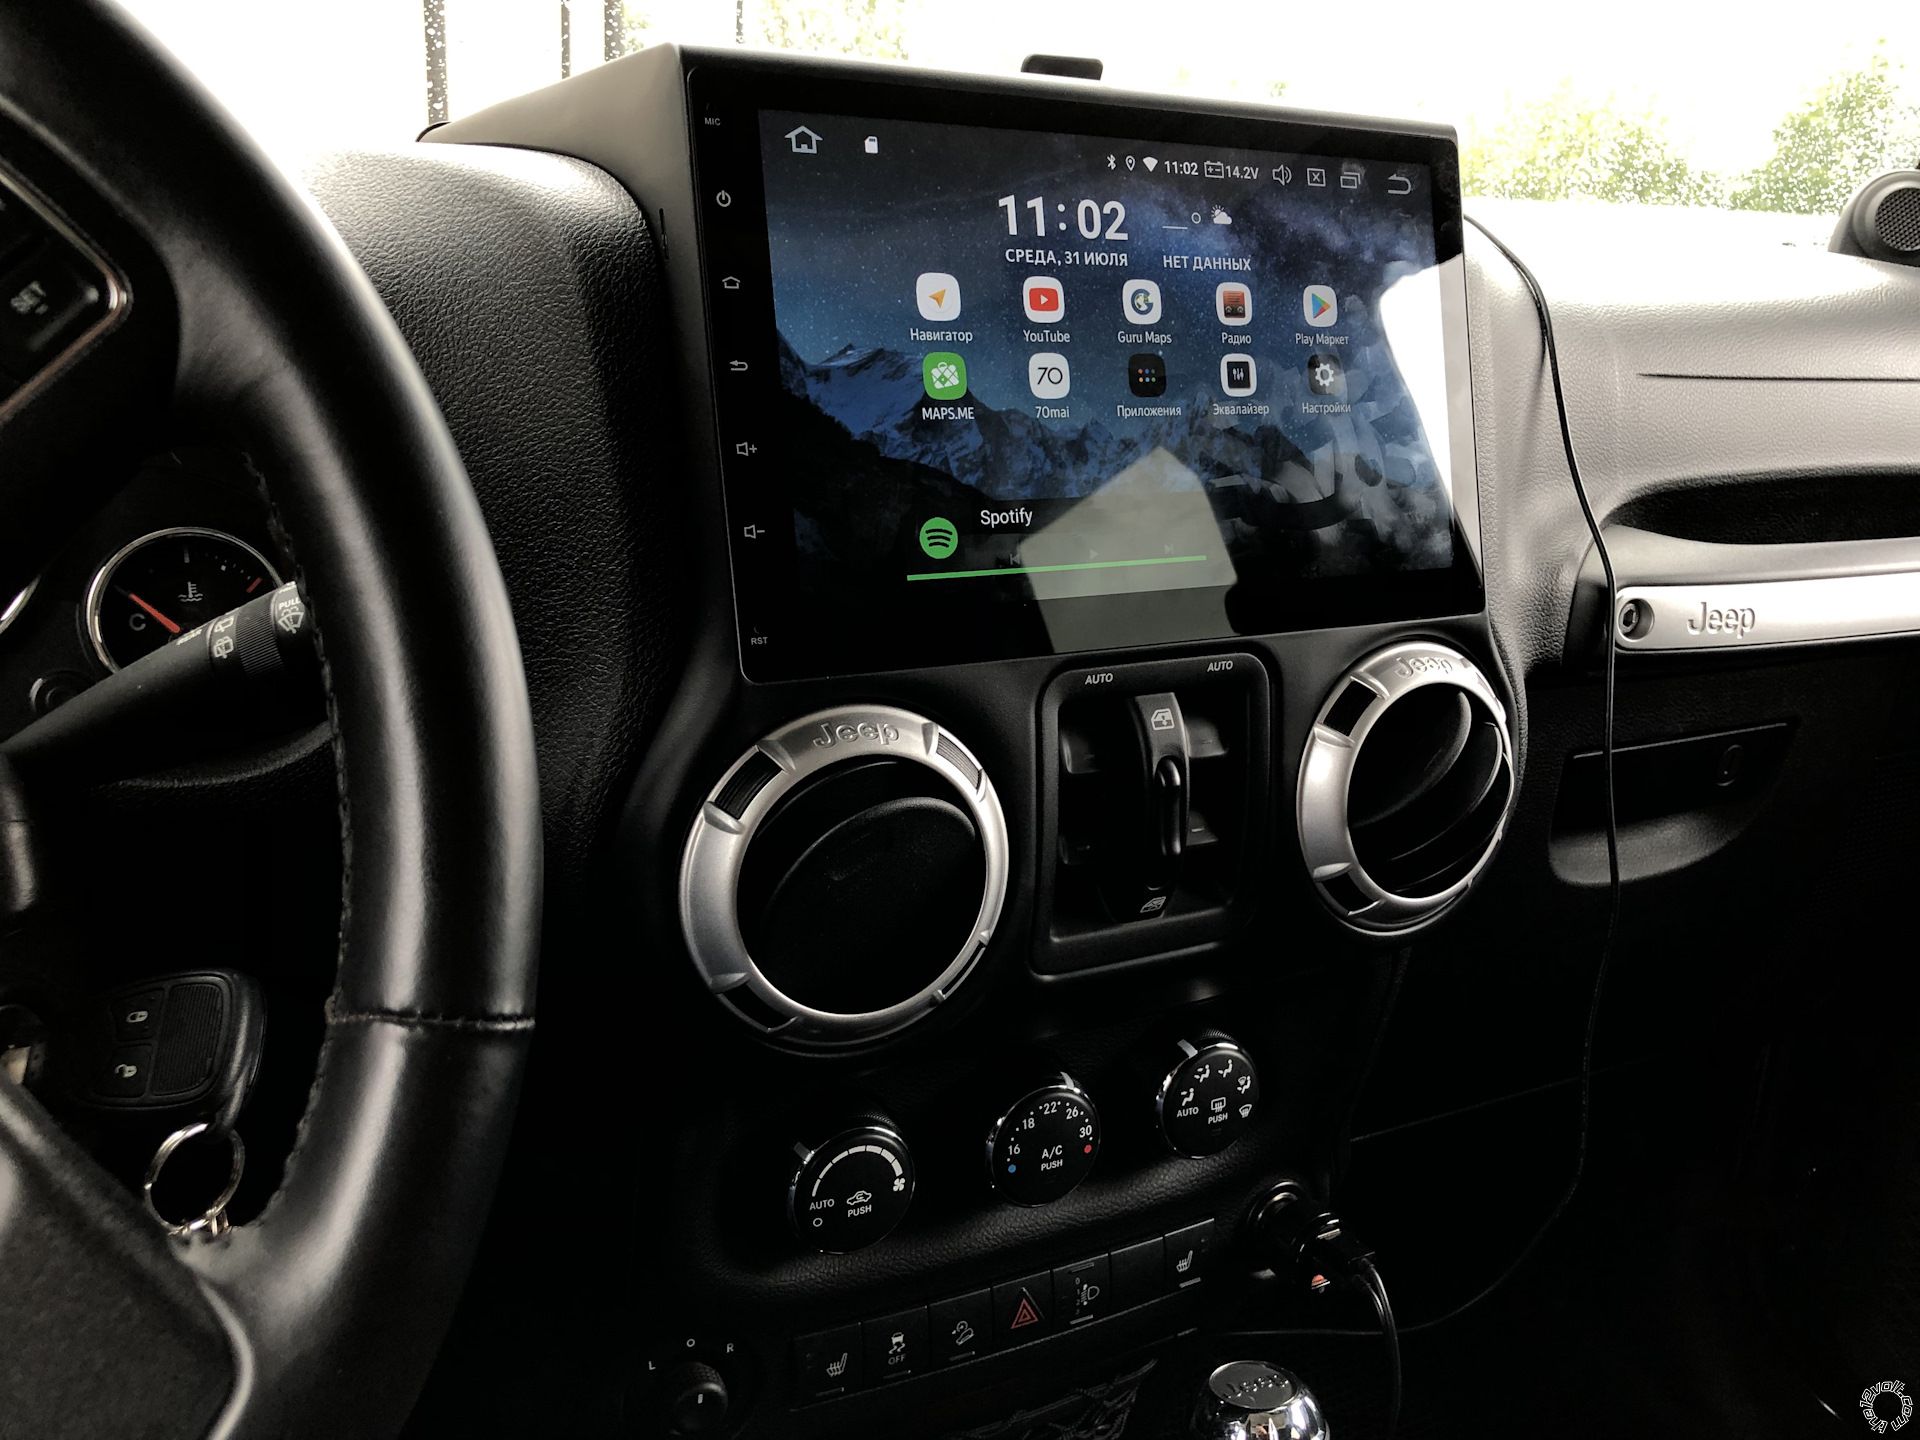 2016 Jeep Wrangler Stereo -- posted image.